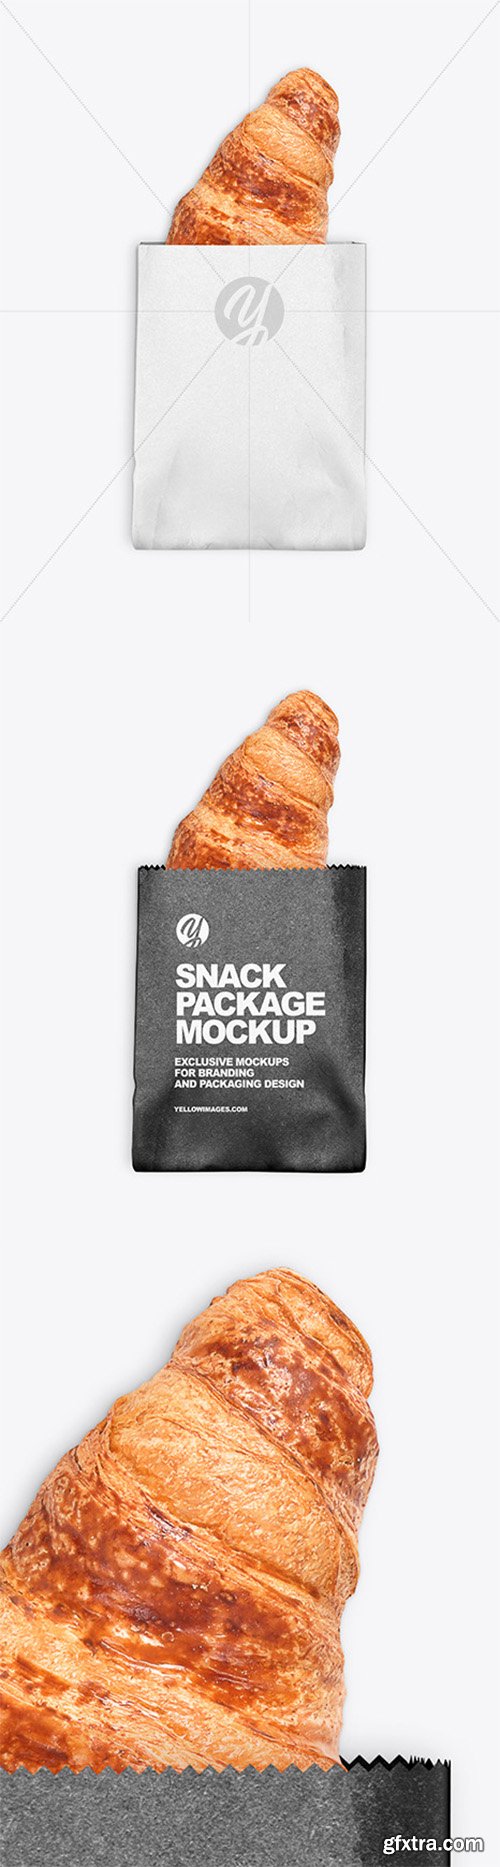 Download 32+ Bread Packaging Mockup Psd Potoshop - 32+ Bread Packaging Mockup Psd Potoshop . Use these ...